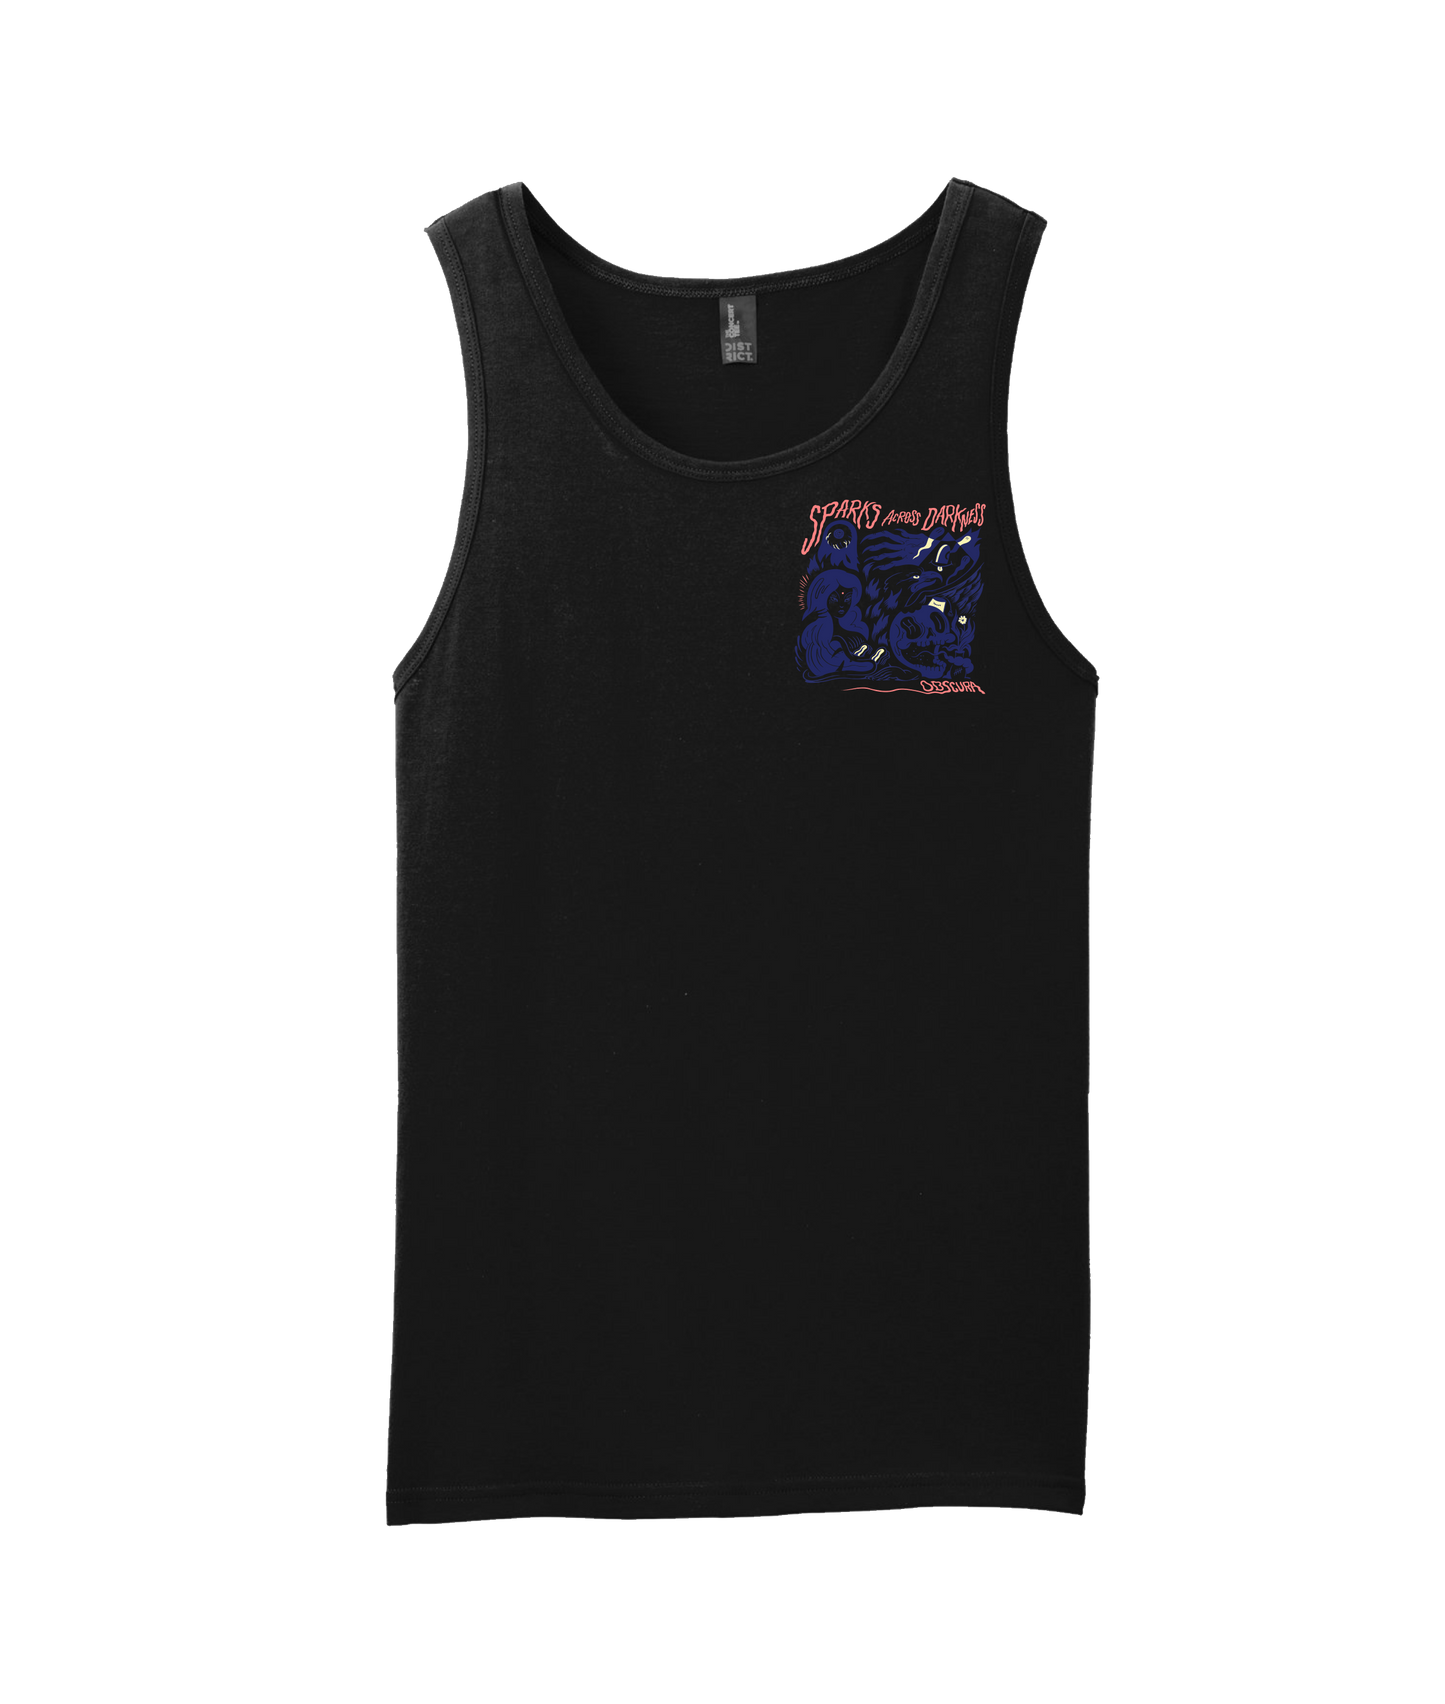 Sparks Across Darkness - Obscura - Black Tank Top